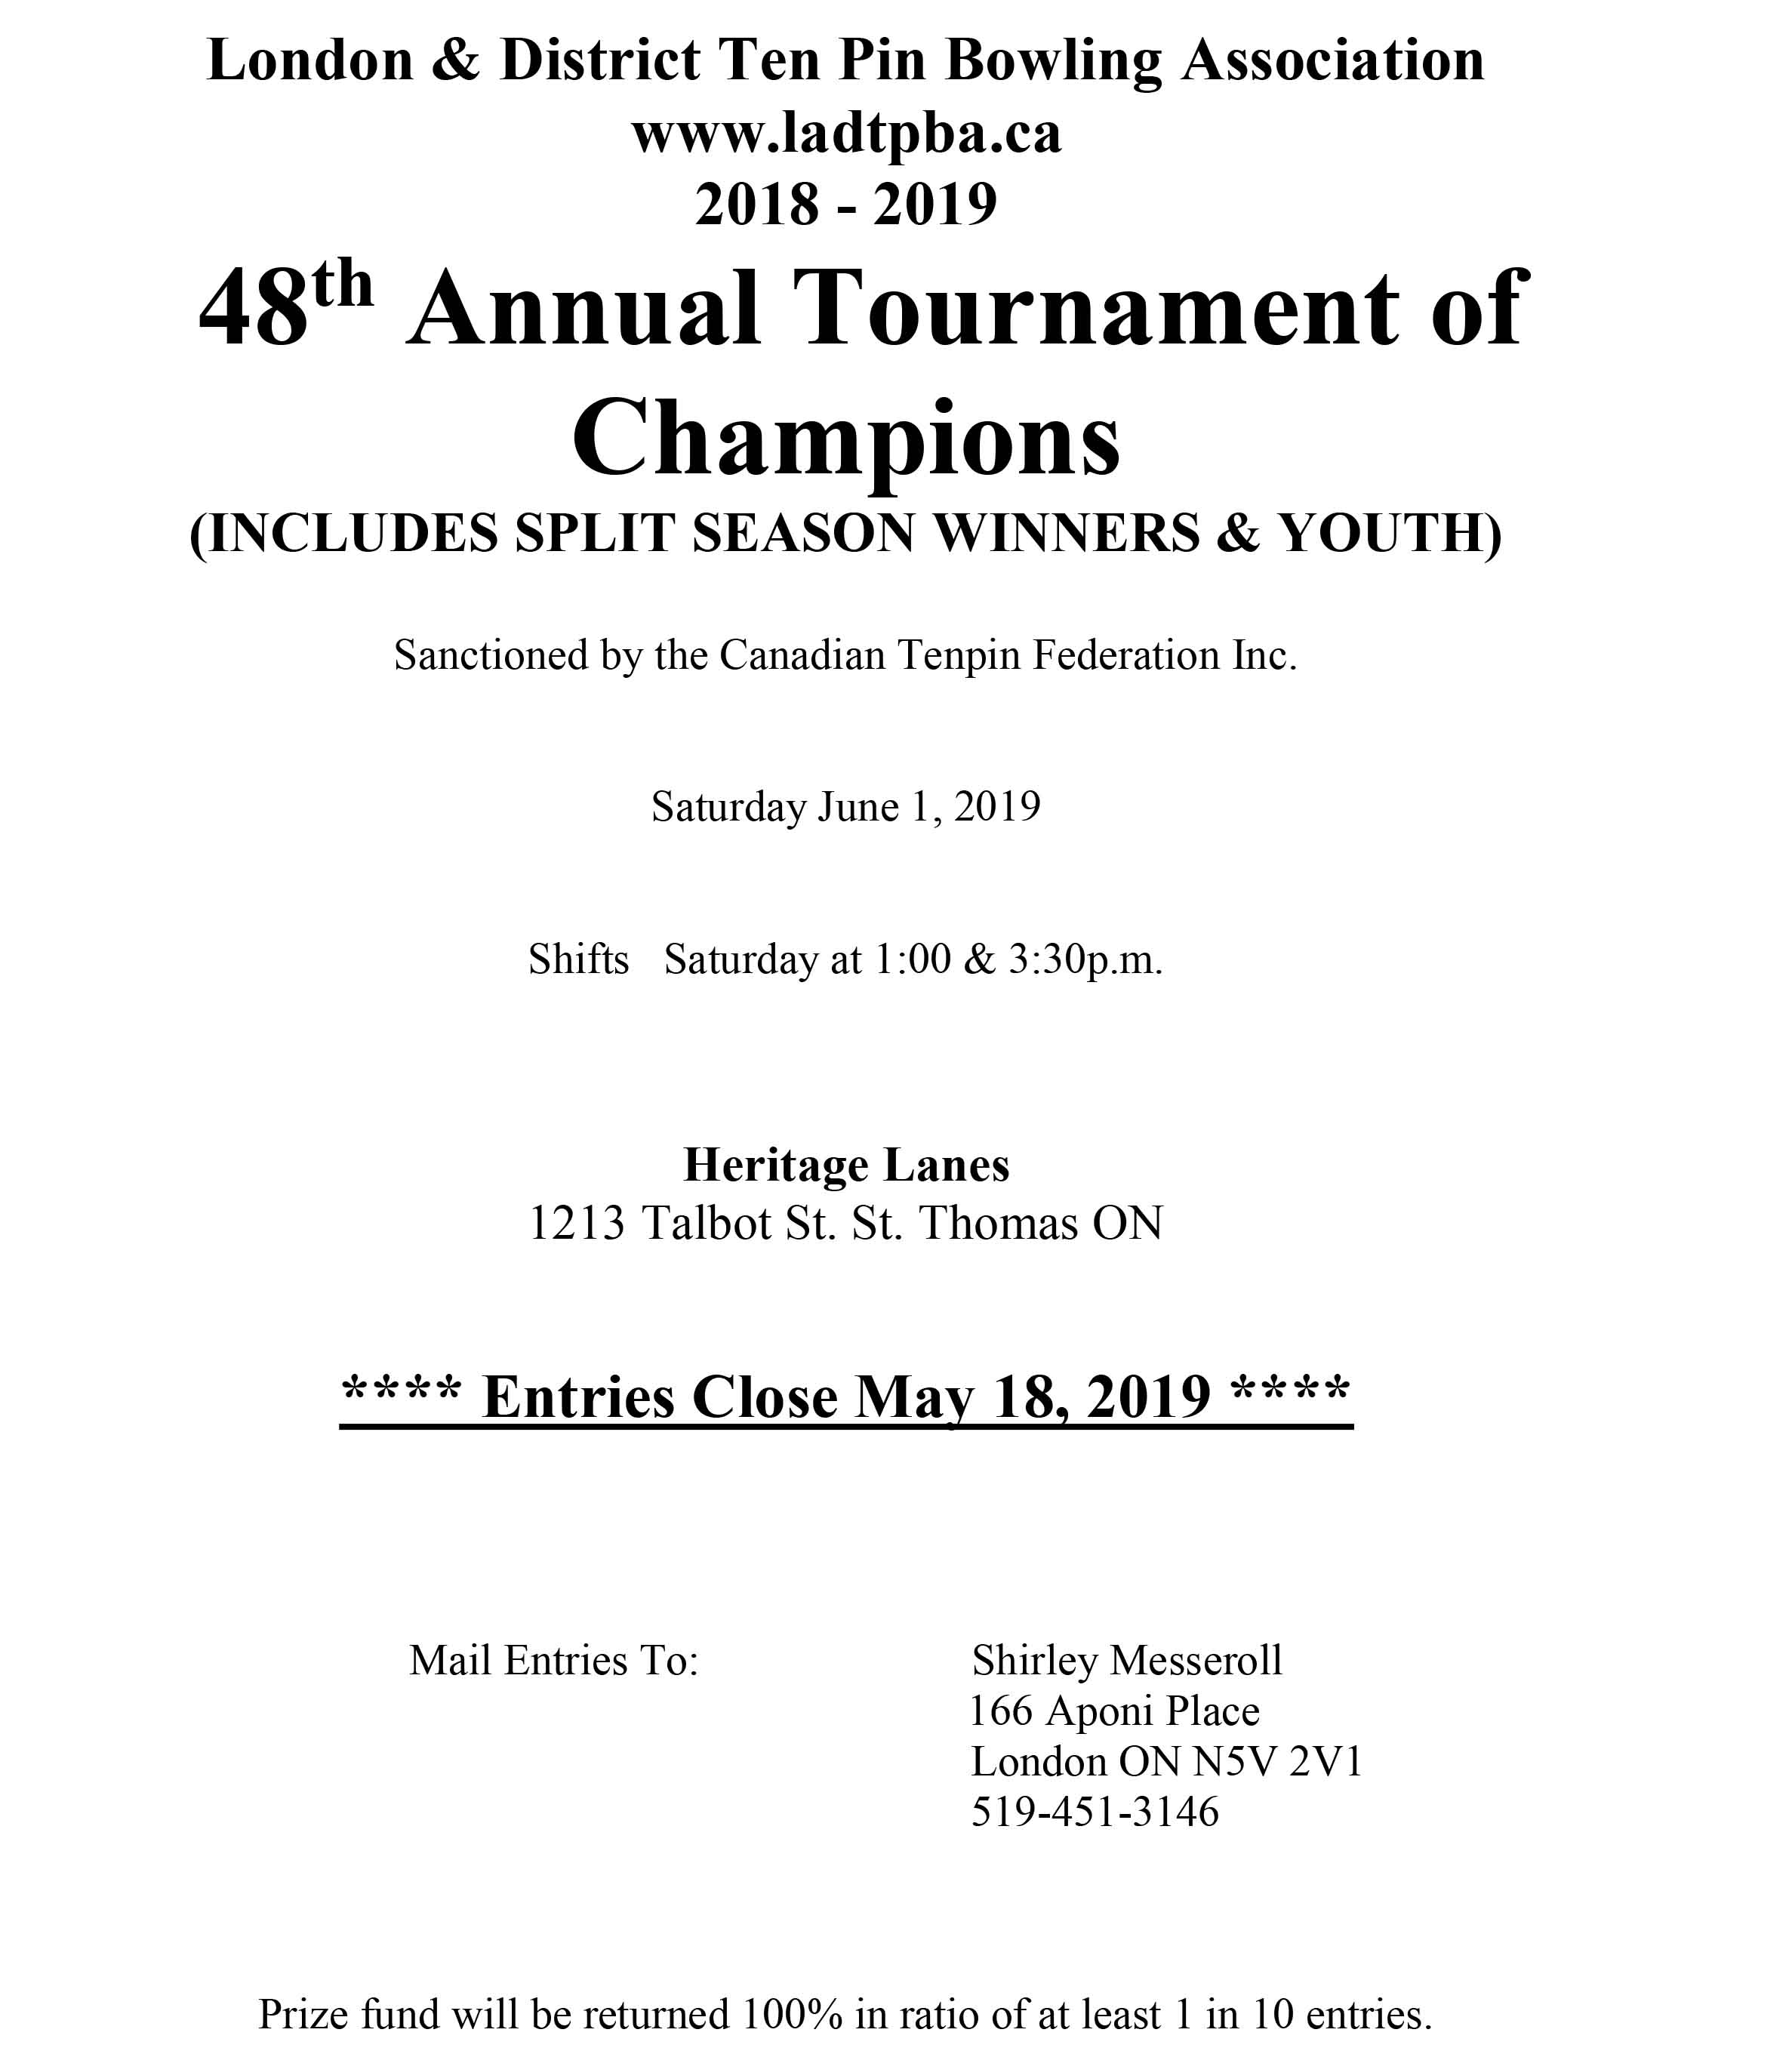 LADTPBA 2019 Tournament of Champions Entry Form